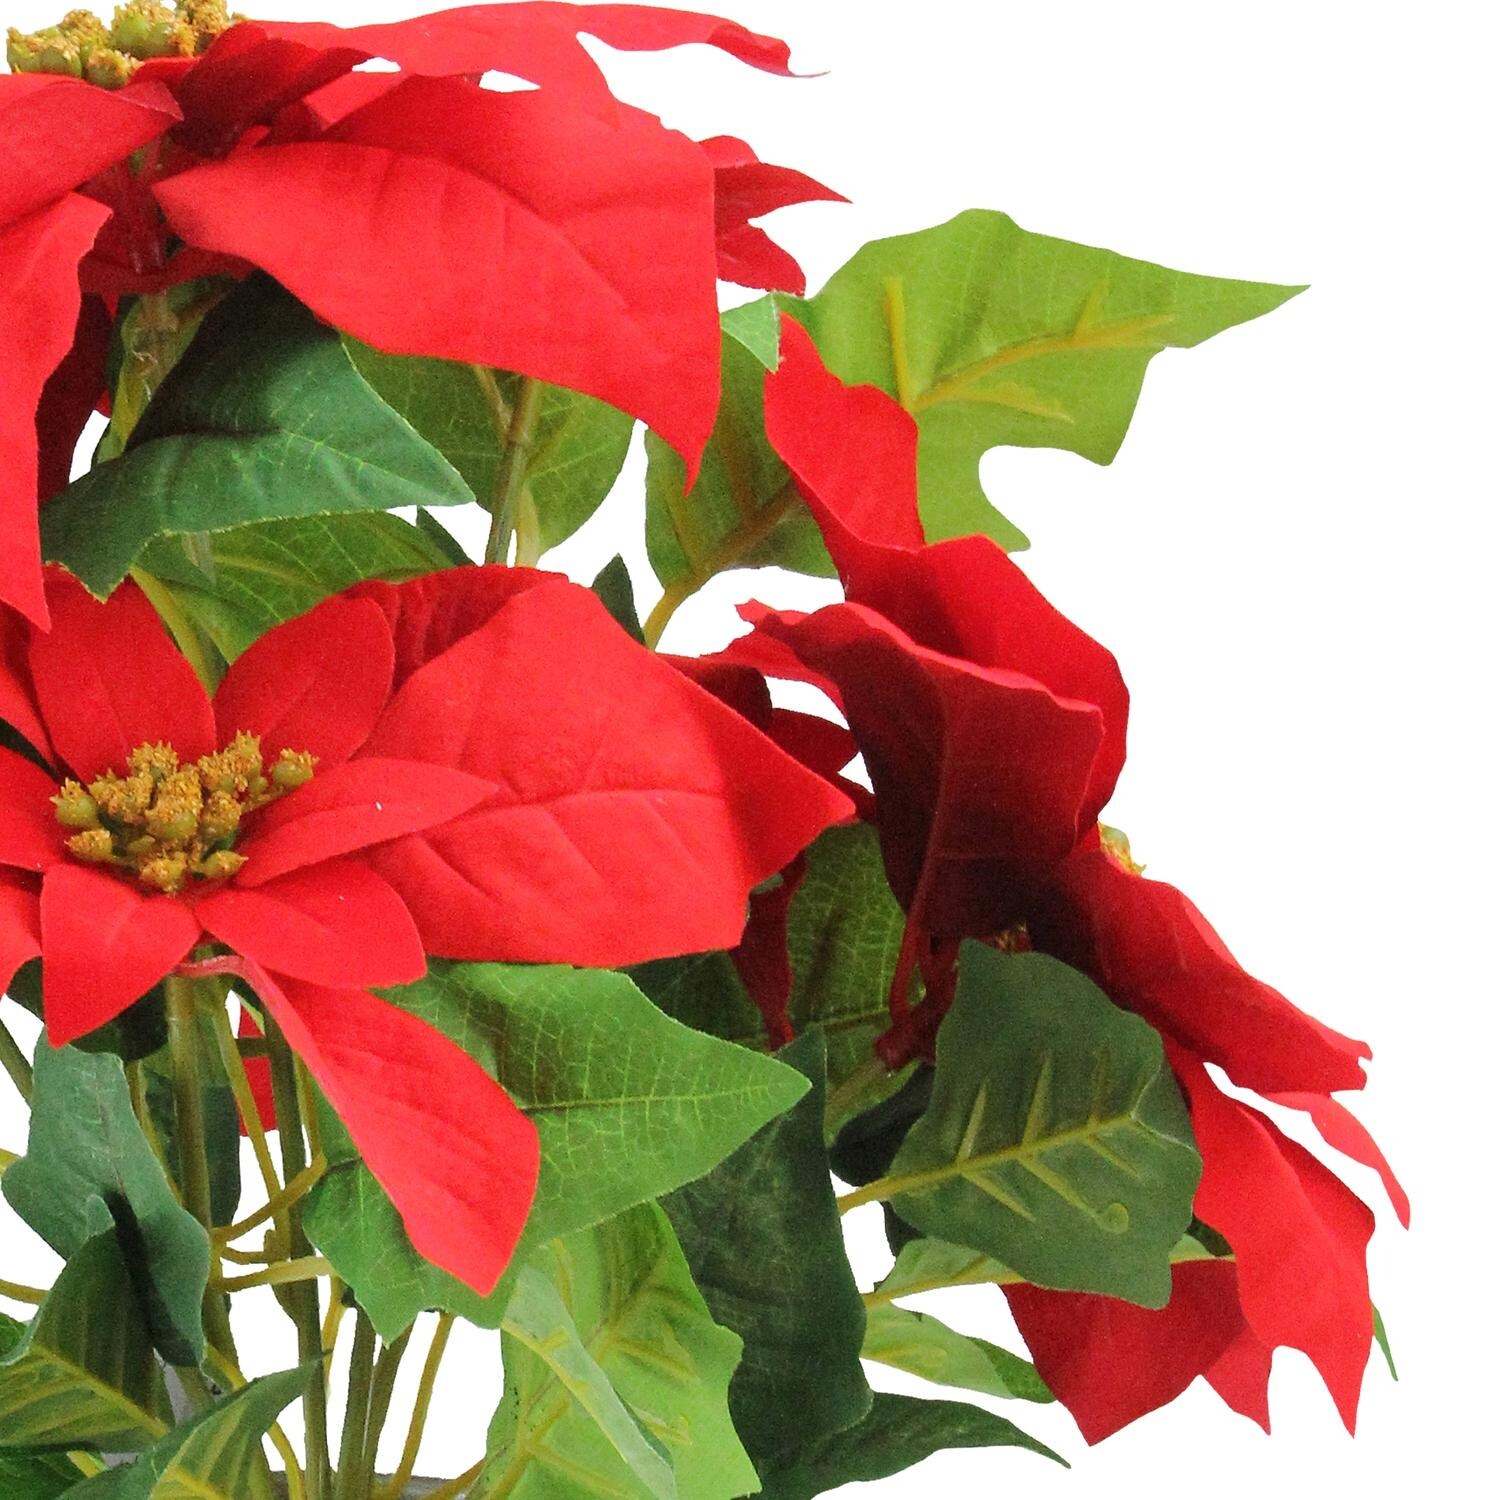 15.5 Artificial Red and Green Poinsettia Flower Arrangement in Vase